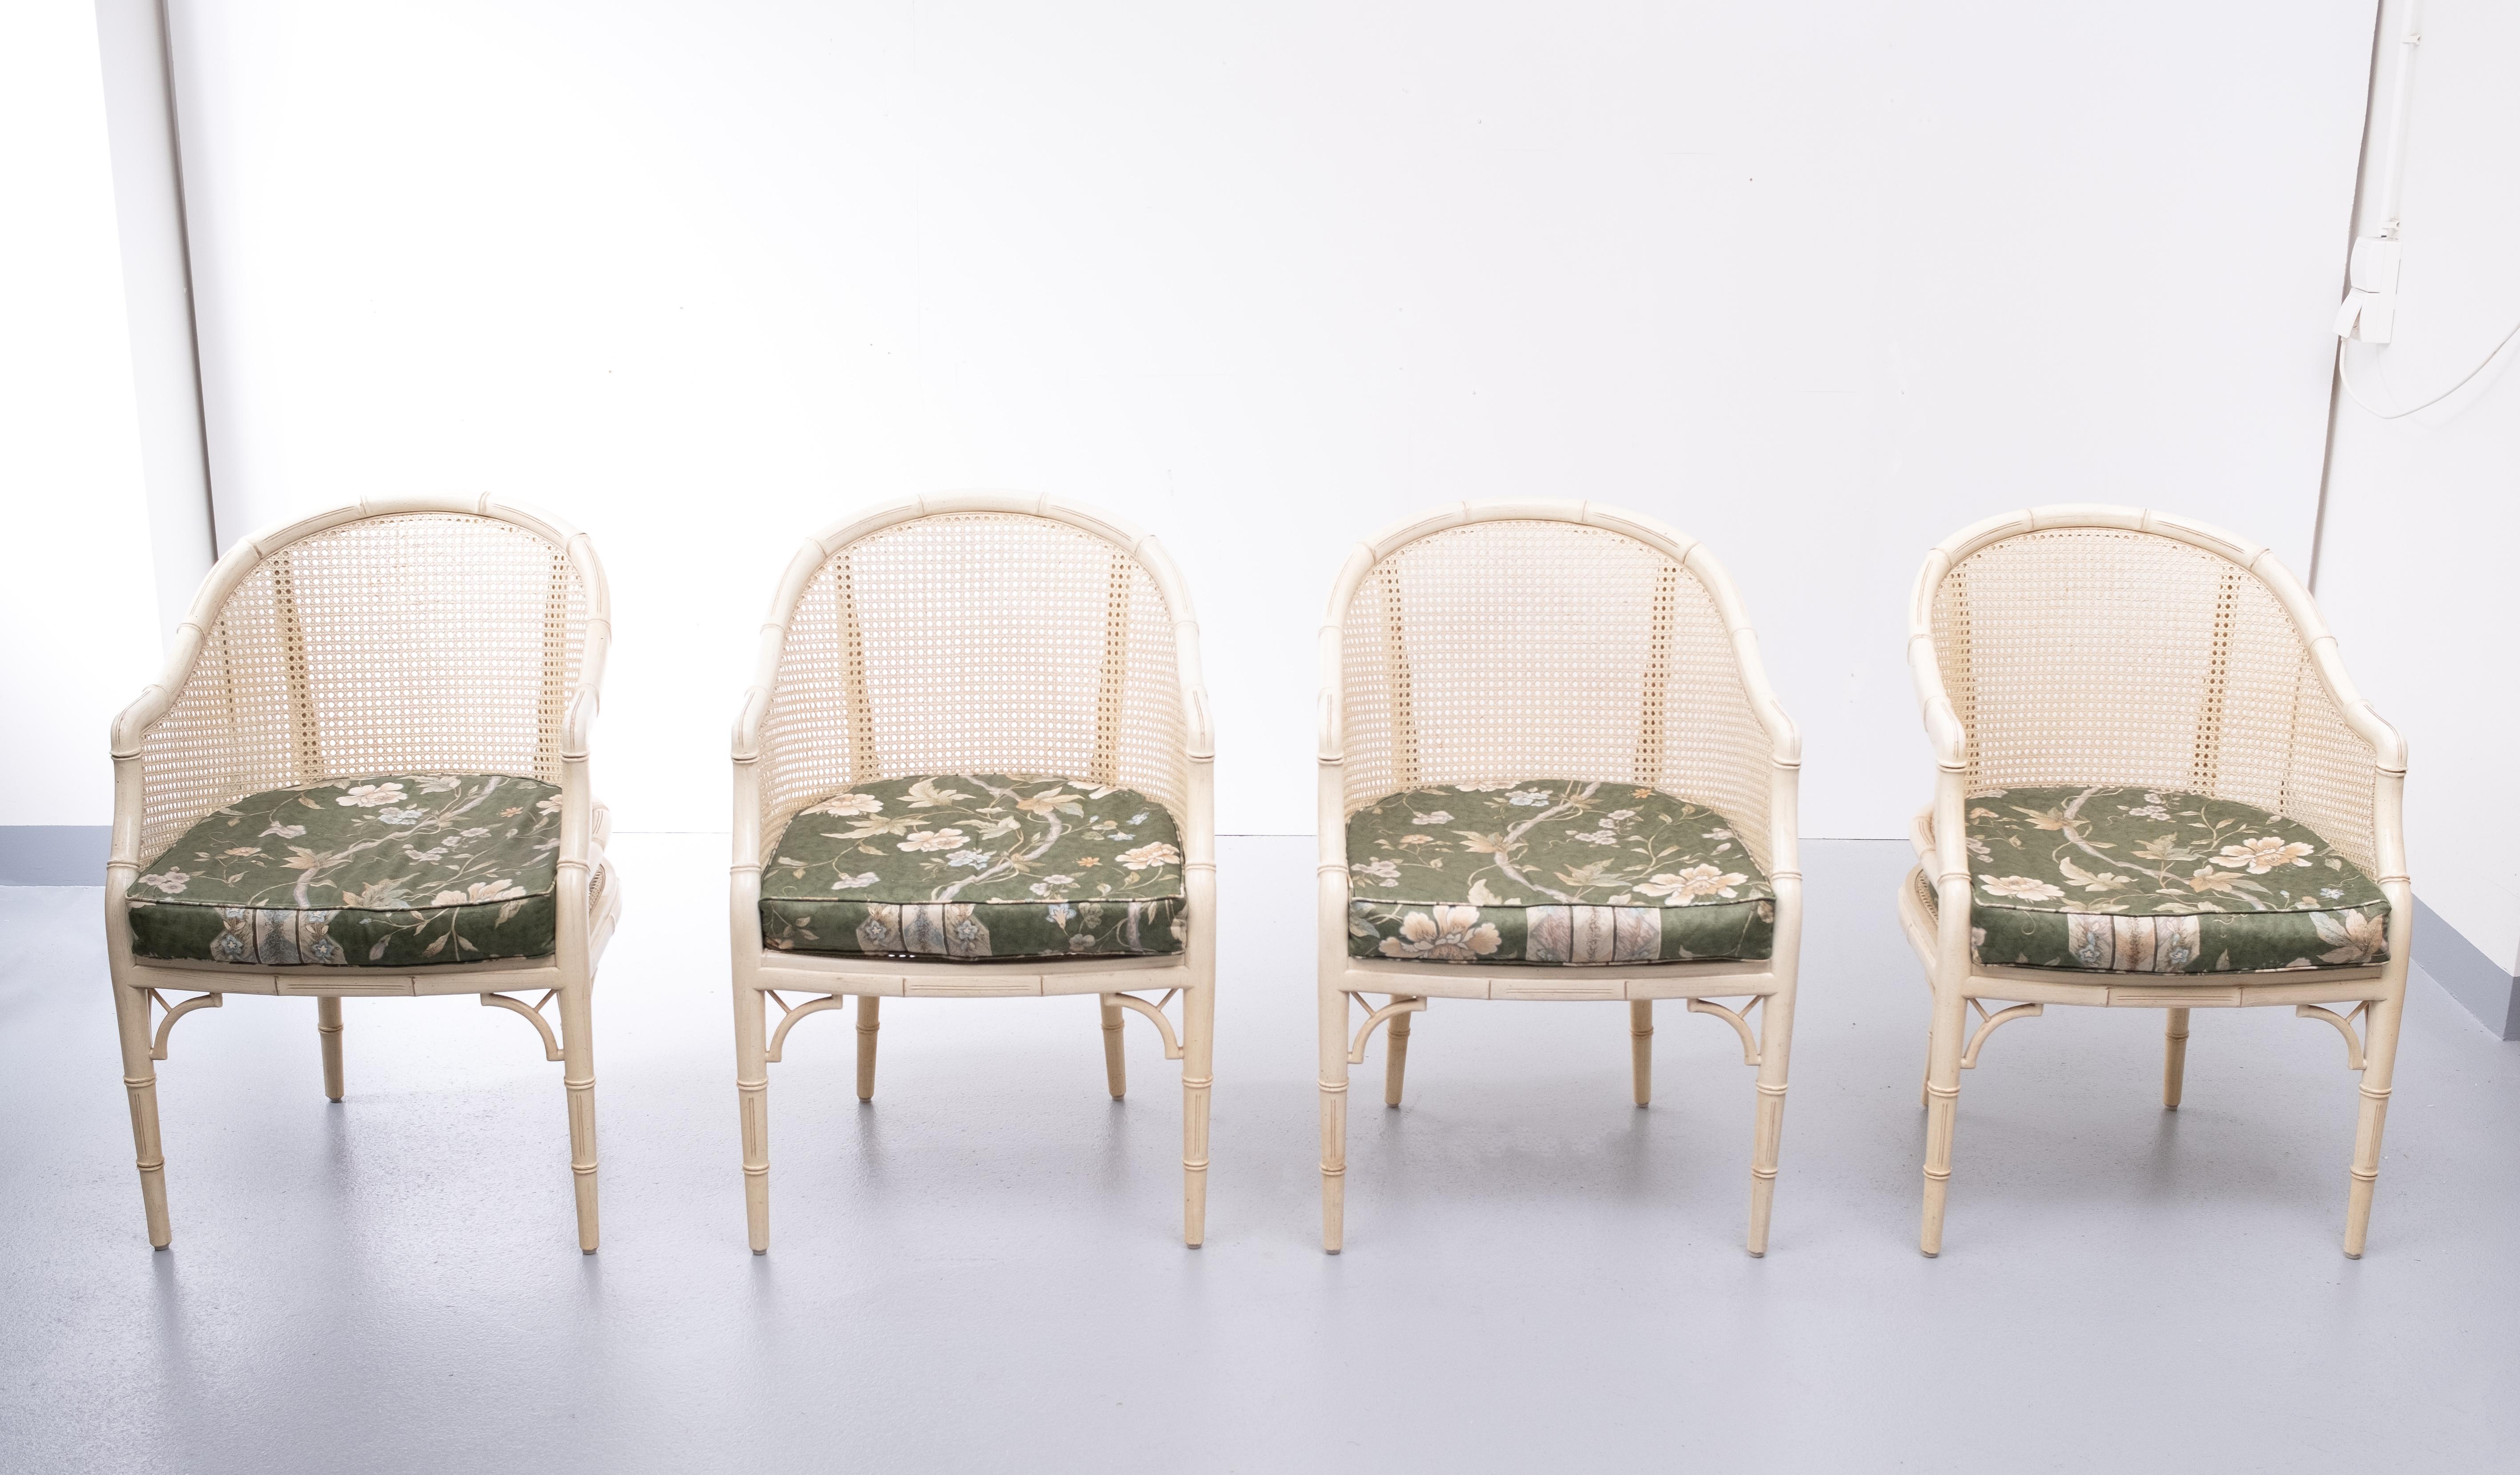 Faux bamboo Chinese Chippendale armchairs. Wicker seating and back. Off white color.
Comes with silk flower pattern pillows. Very good condition.
 